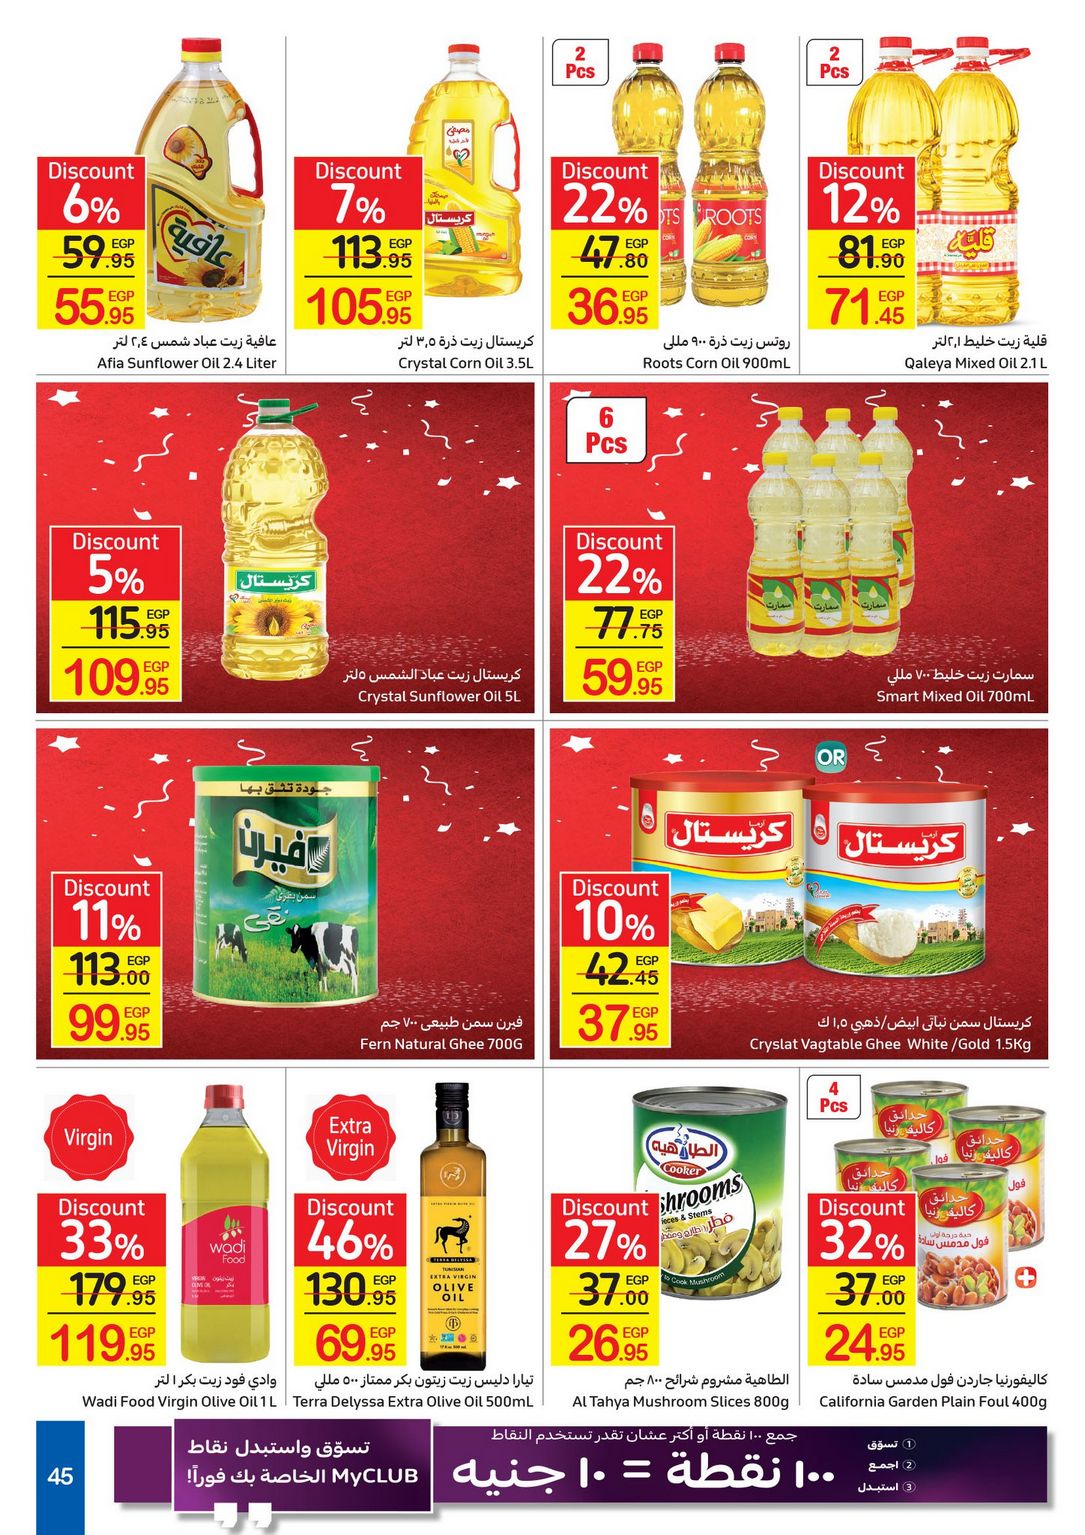 Carrefour Anniversary Offers till 18/2/2021 | Carrefour Egypt 47